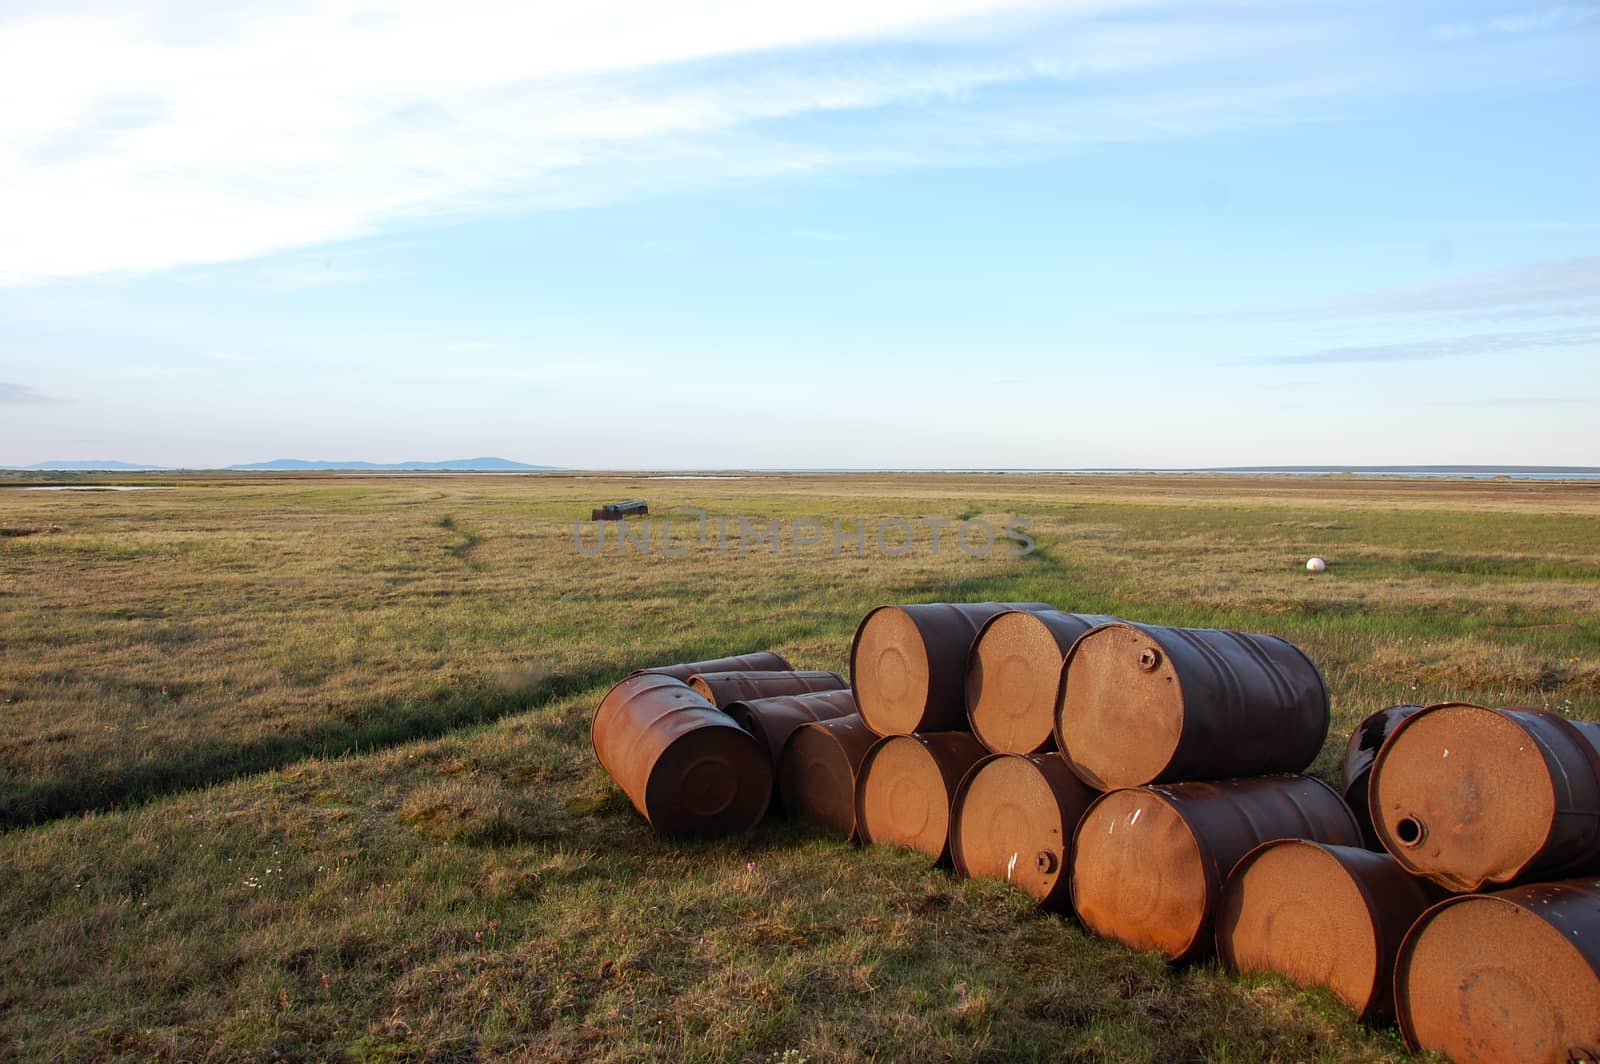 Abandoned oil drums at tundra by danemo